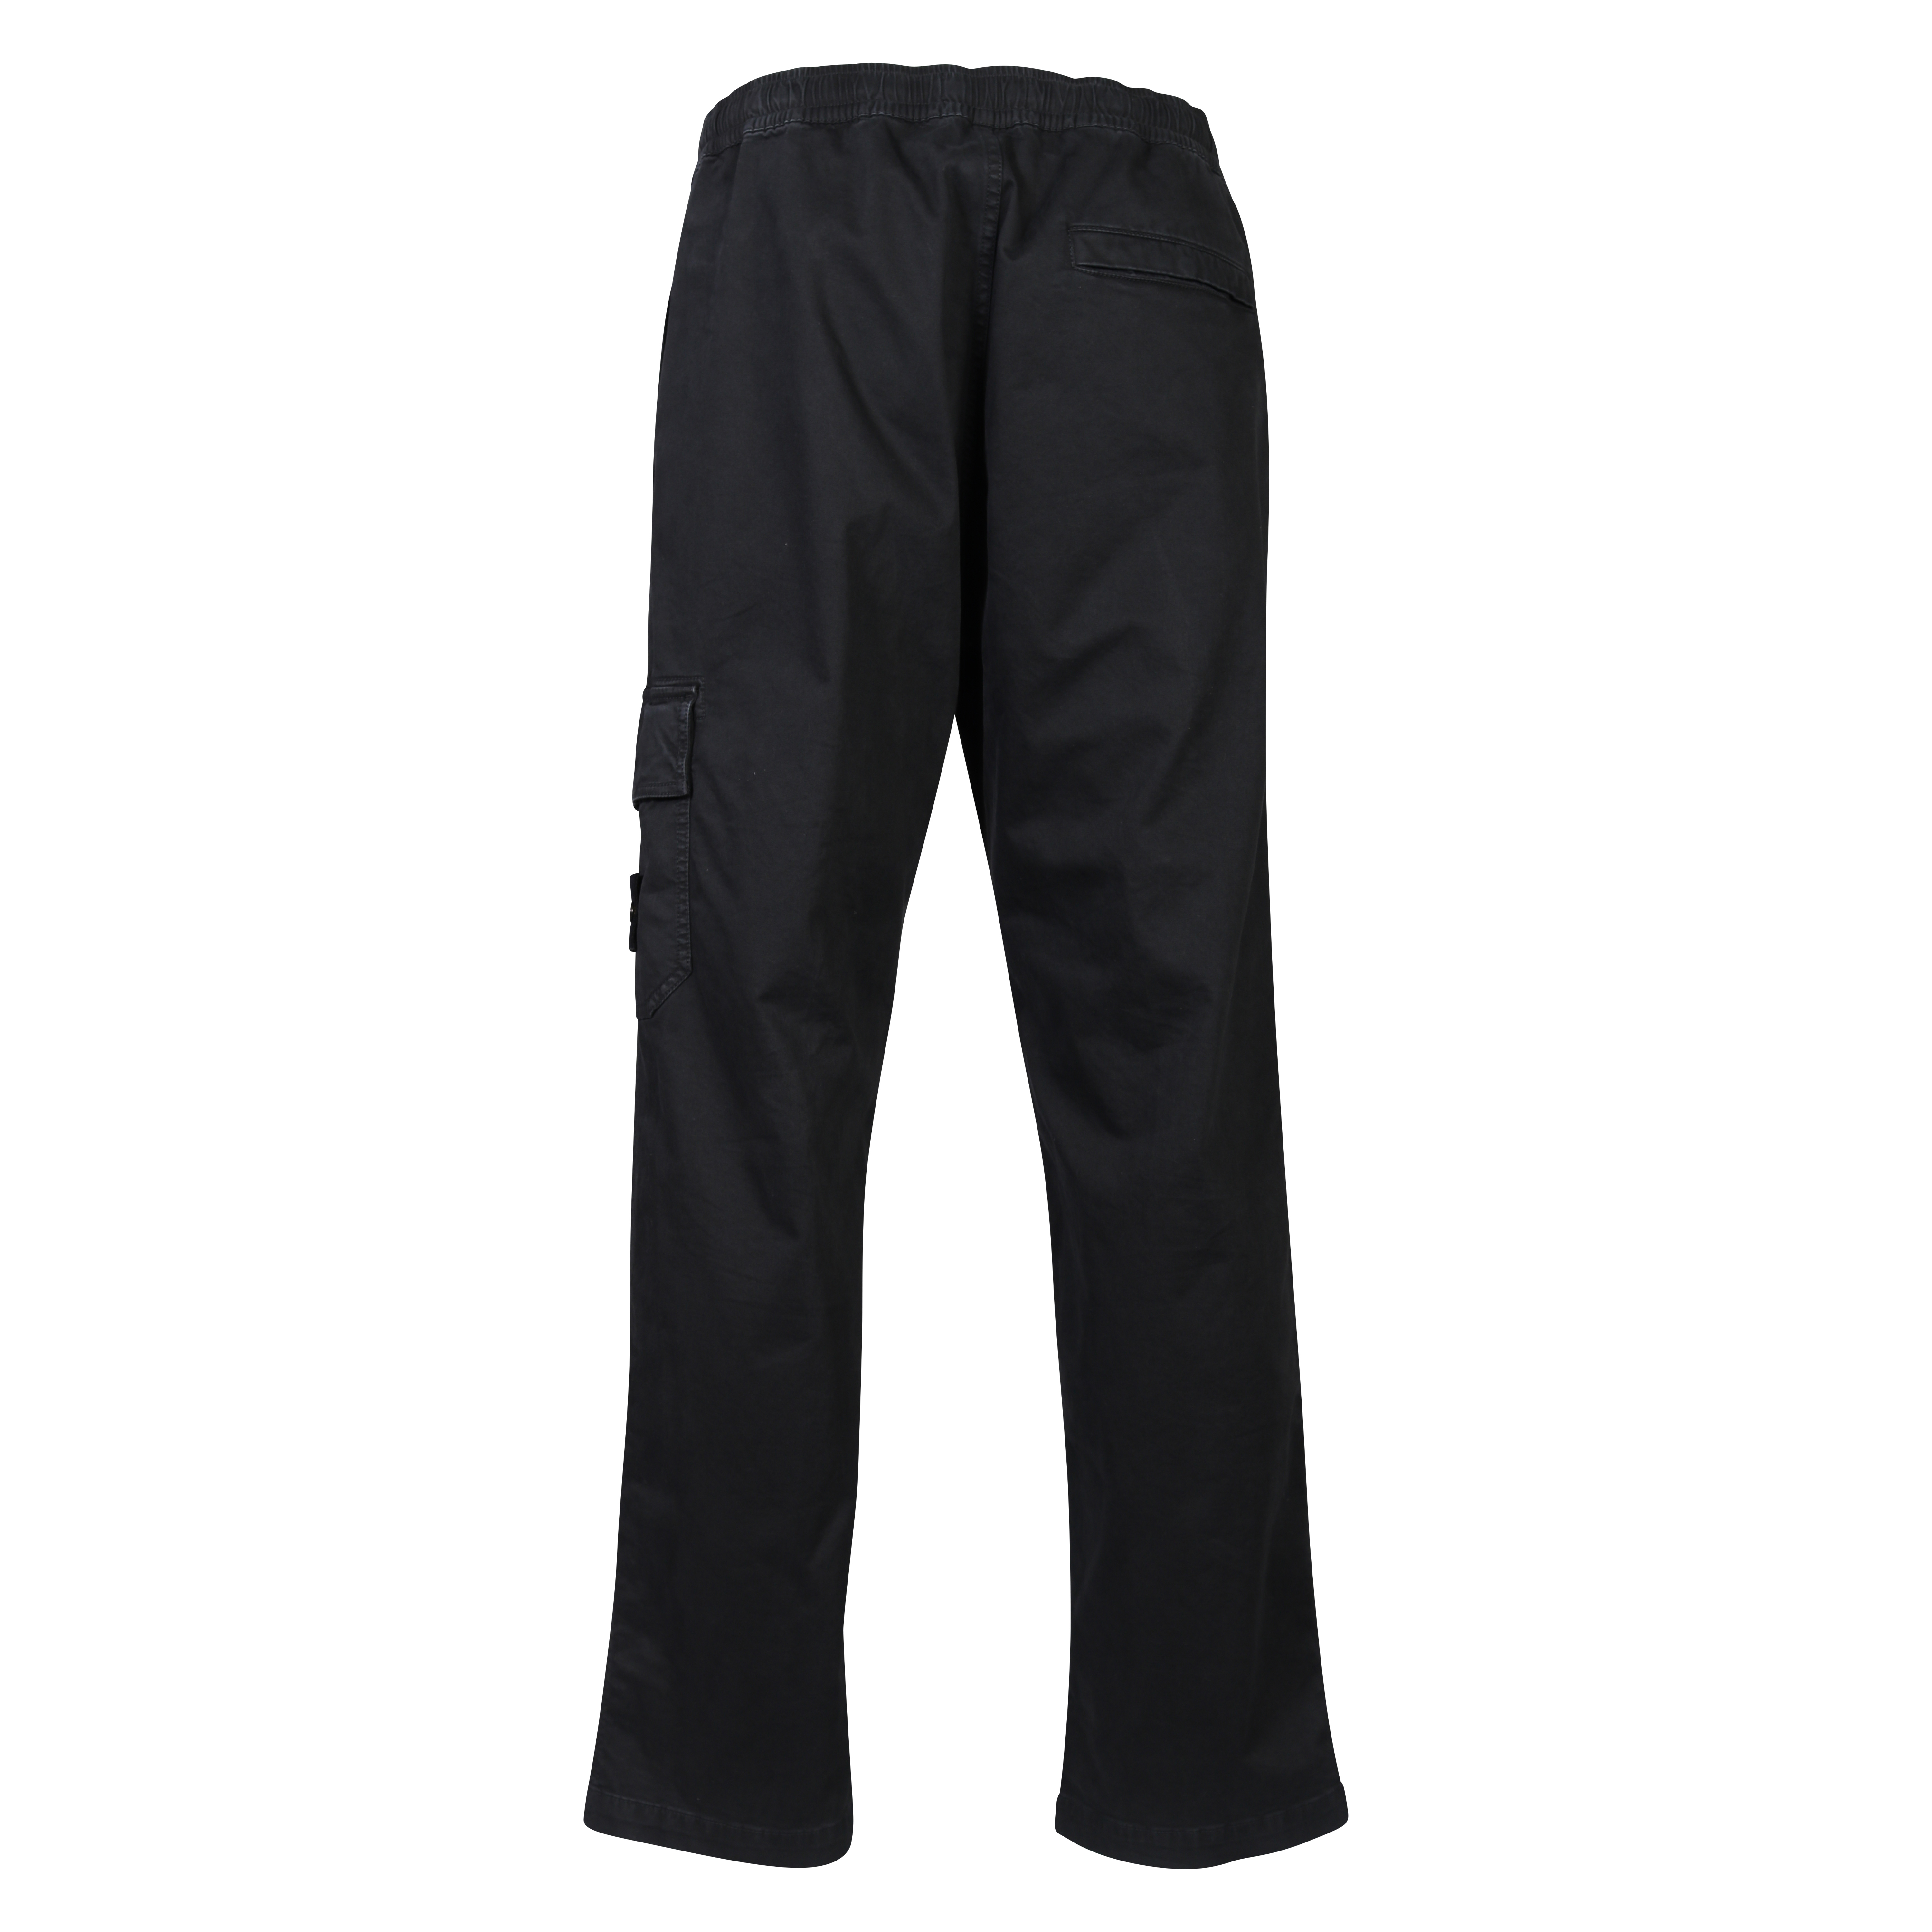 STONE ISLAND Loose Cargo Pant in Black Washed